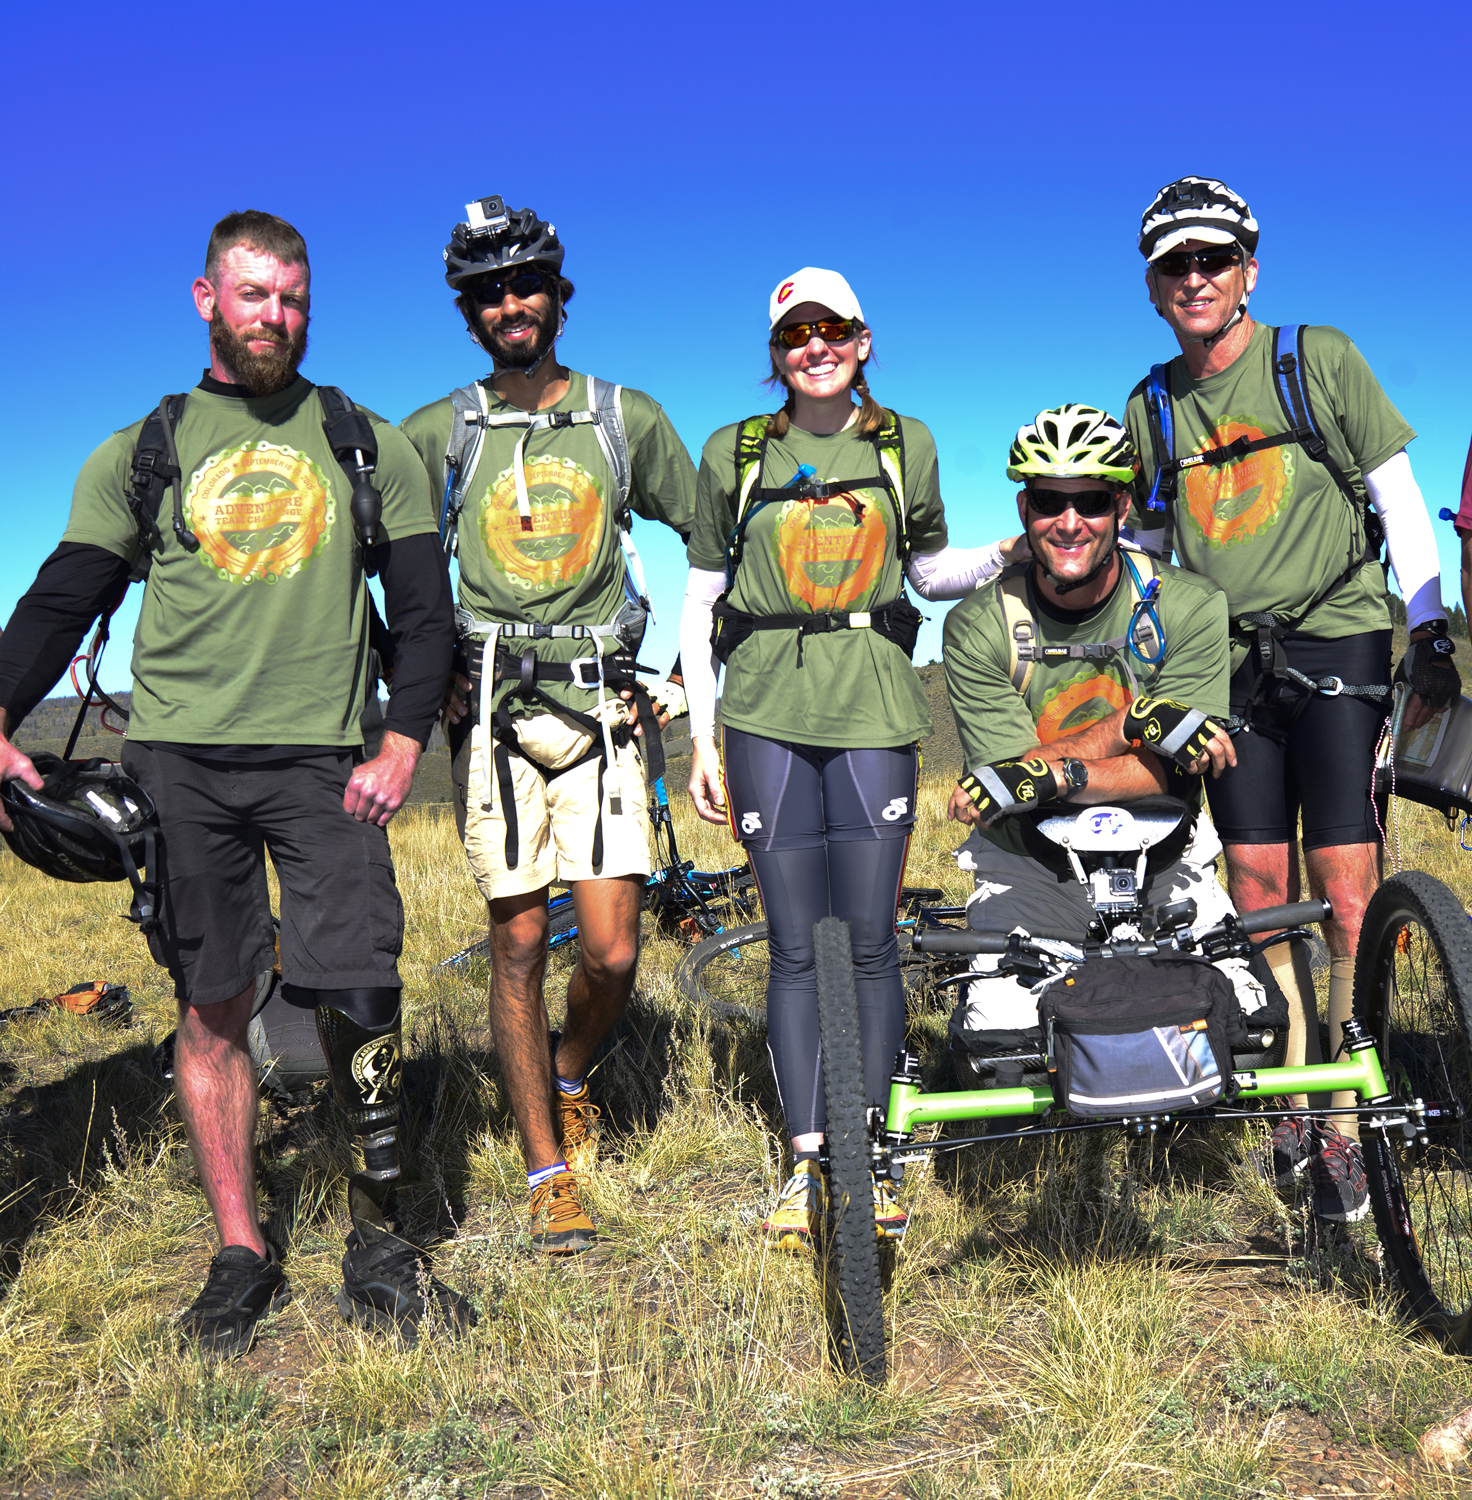 The Misfits team won the 2015 Adventure Team Challenge Colorado. Members included Chelsea Lutrall, Rusty Brooks, Anthony Duran, Michael Carlson and Dan Marshall. Photograph by Brian Gliba.